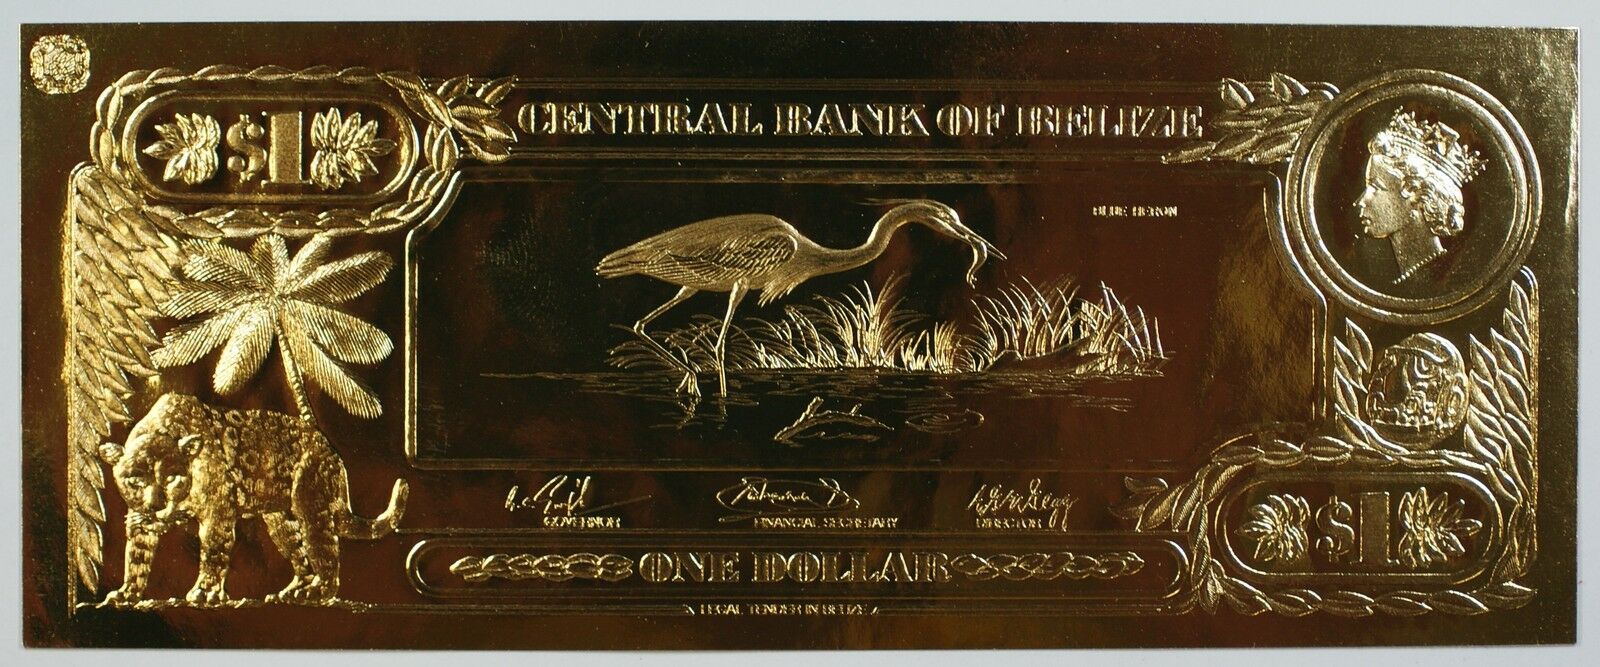 $1 Blue Heron- The First Gold Bank Notes of Belize w/ Presentation Card